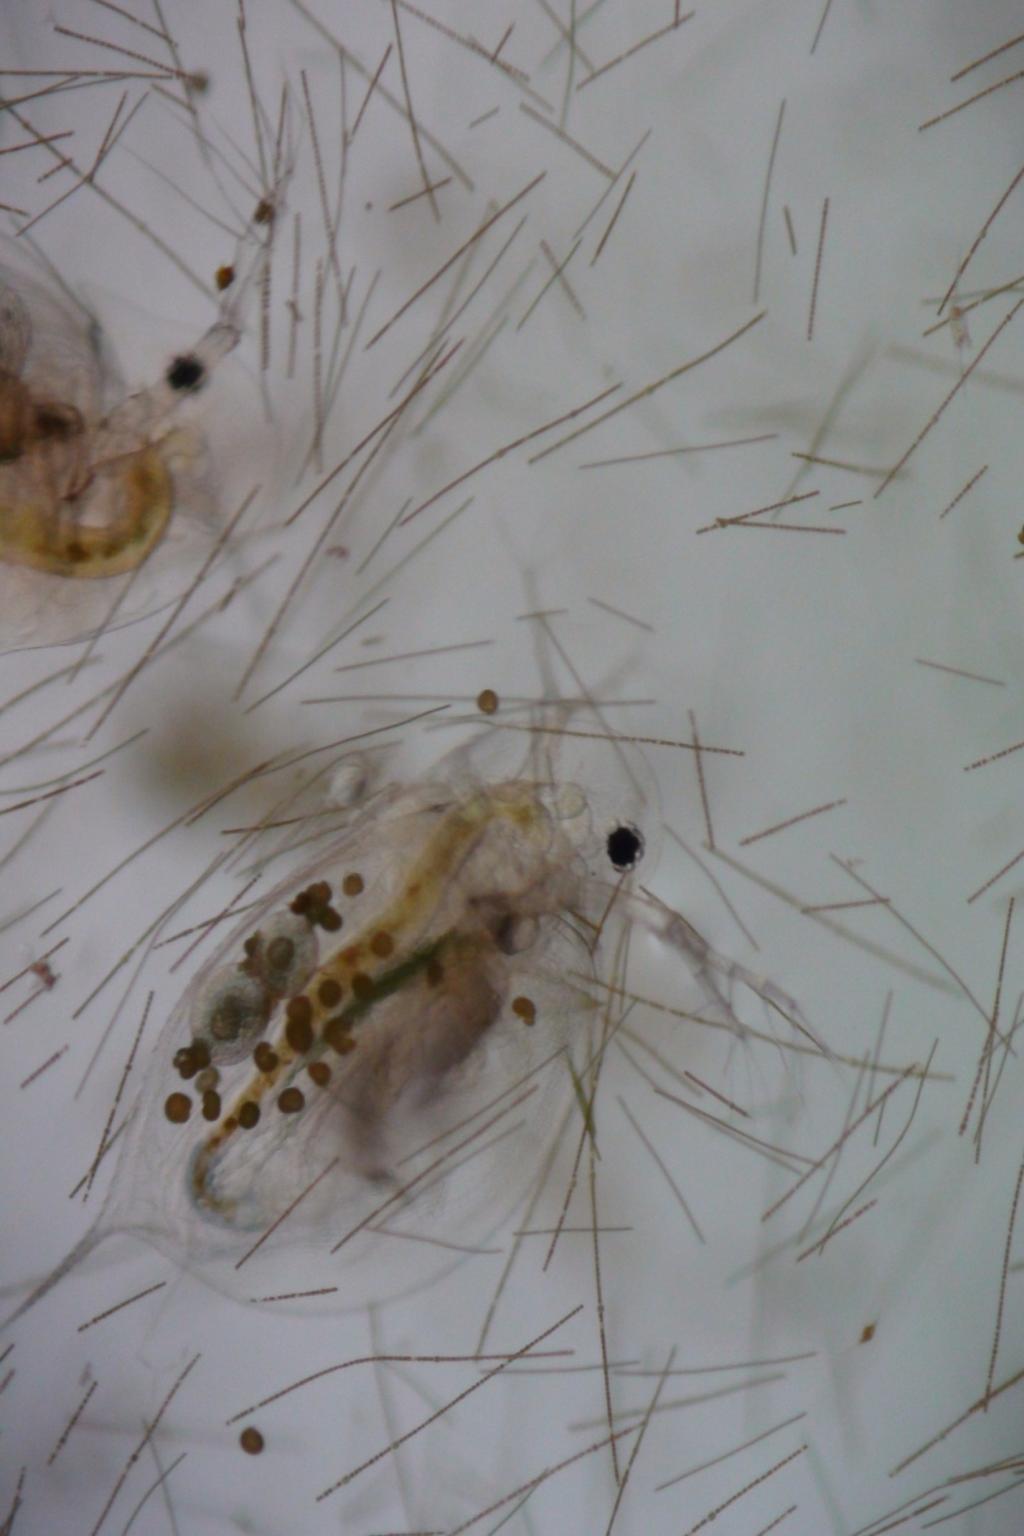 Picocyanobacteria are a more likely source of food for zooplankton than net colonies or